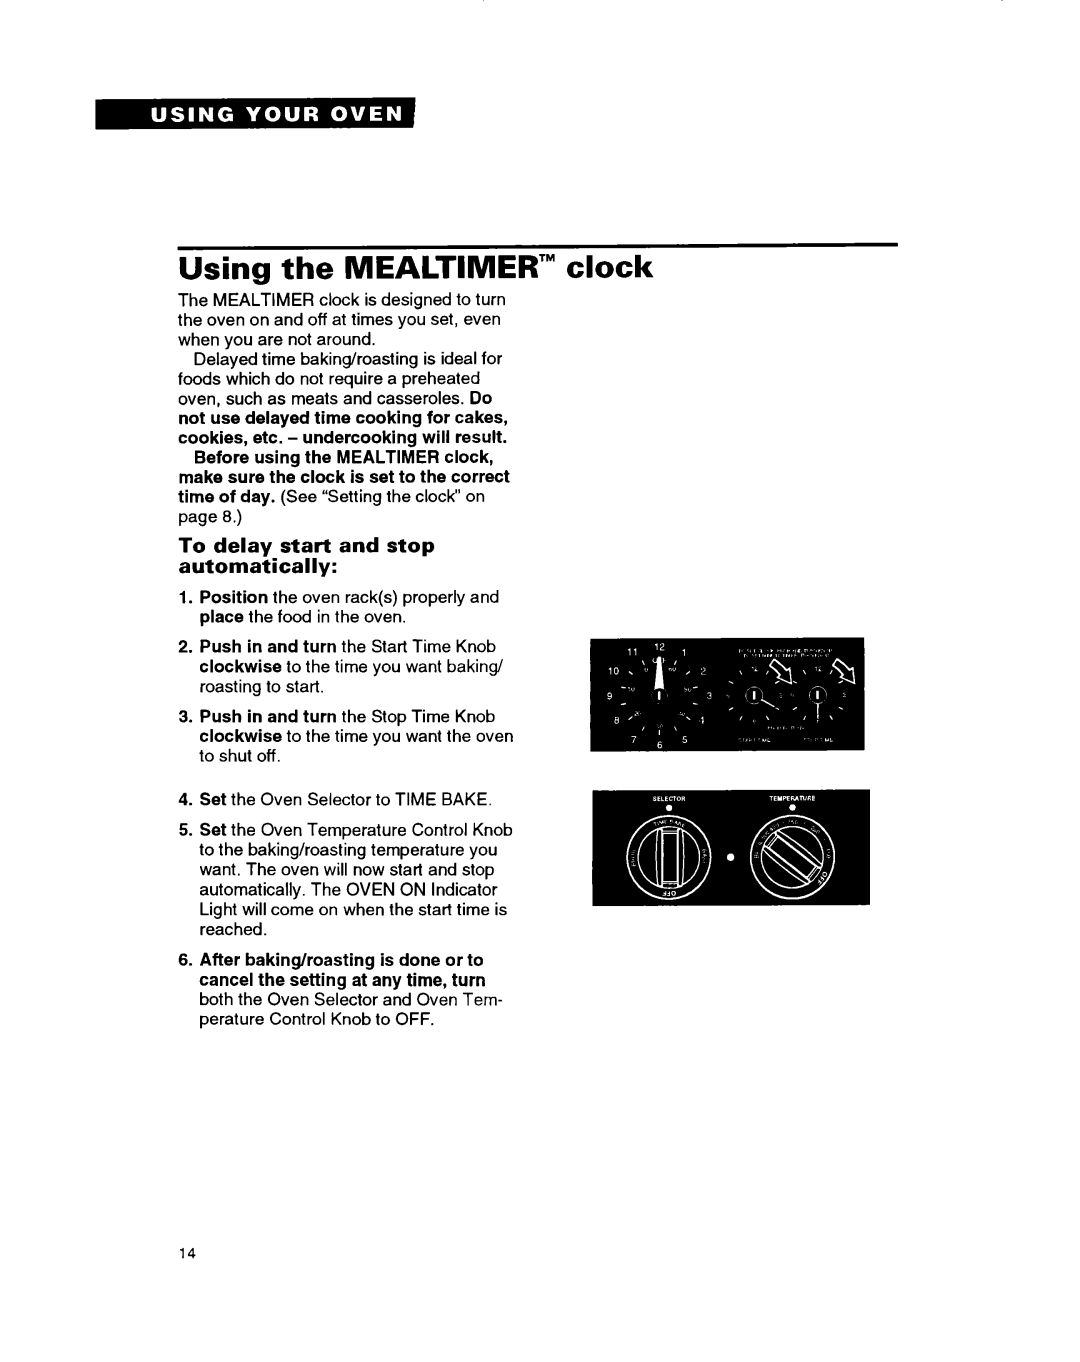 Whirlpool RB220PXB important safety instructions Using the MEALTIMER’” clock, To delay start and stop automatically 